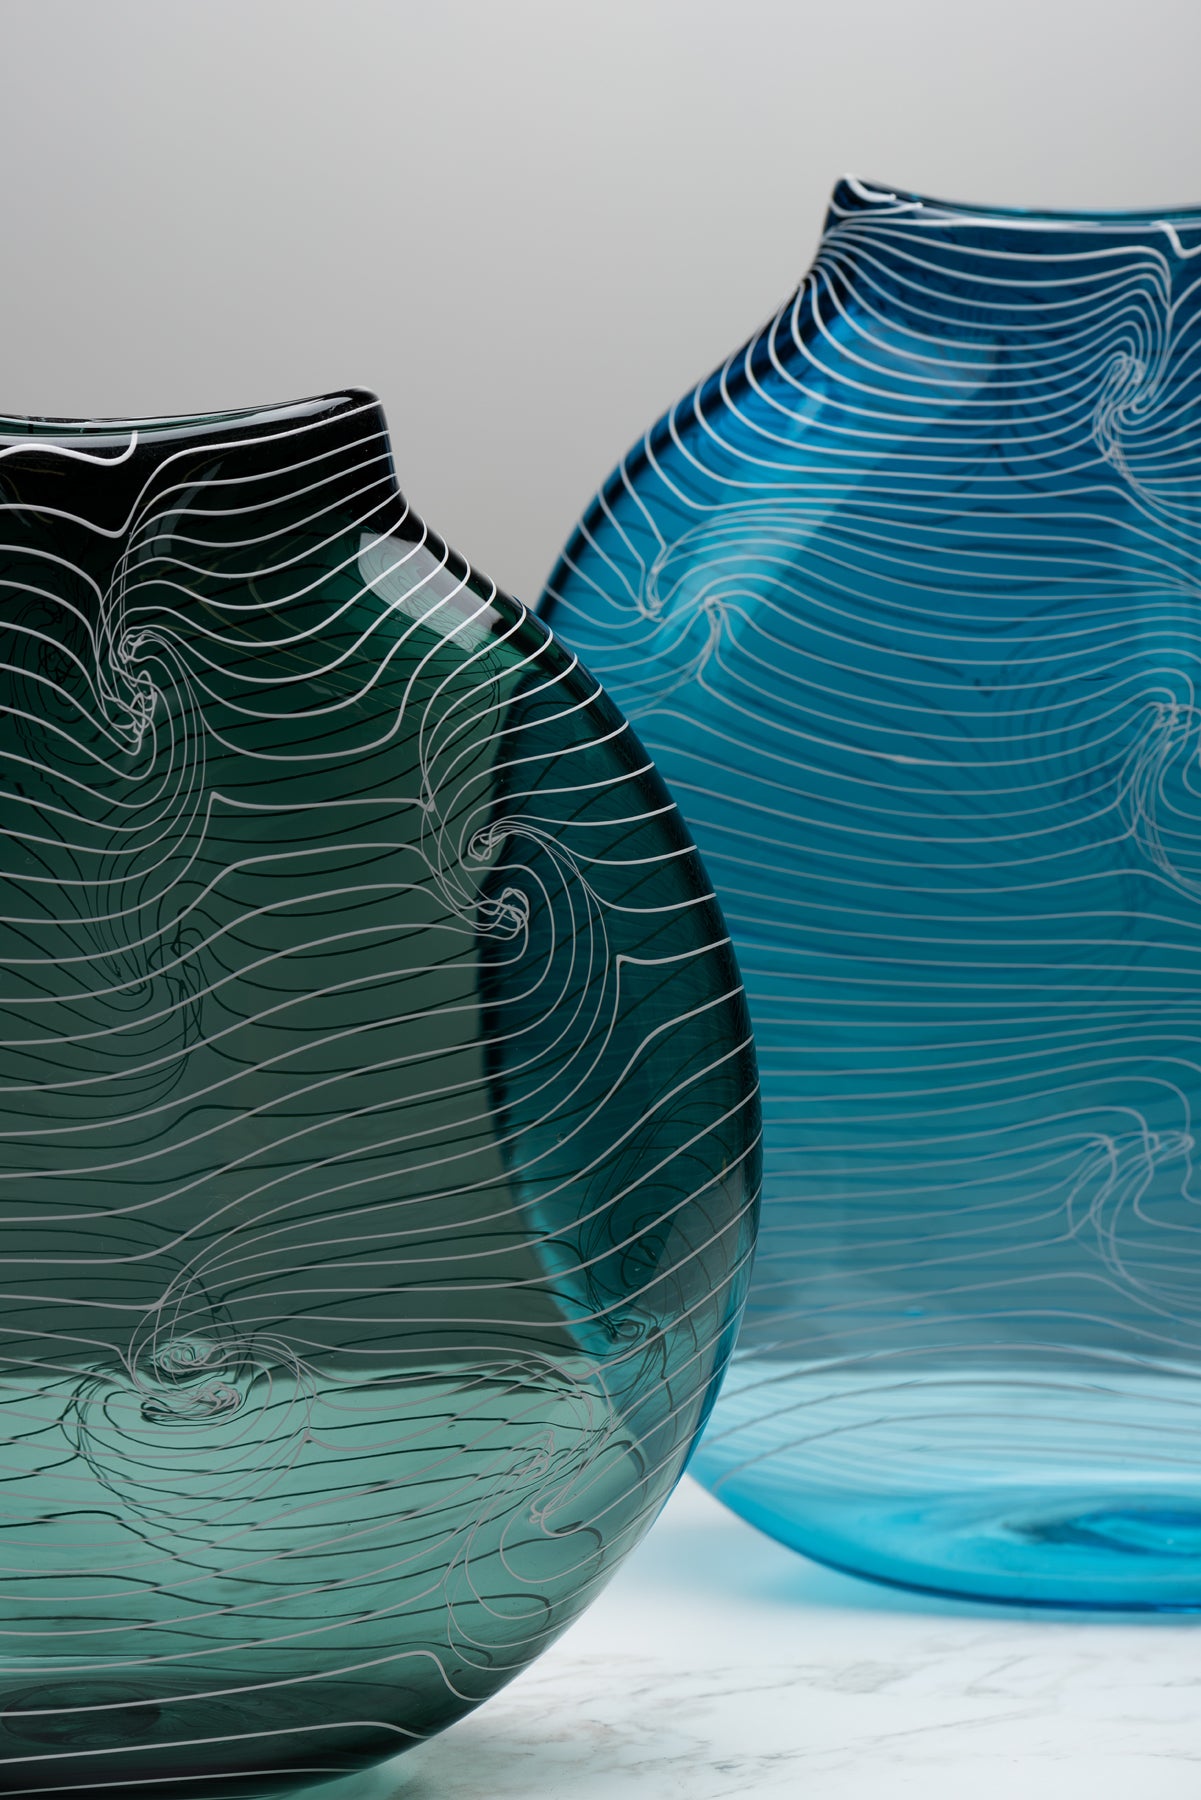 A detail view of two overlapping blue handblown vessels by Asher Holman (small batch glass). Image by Loam